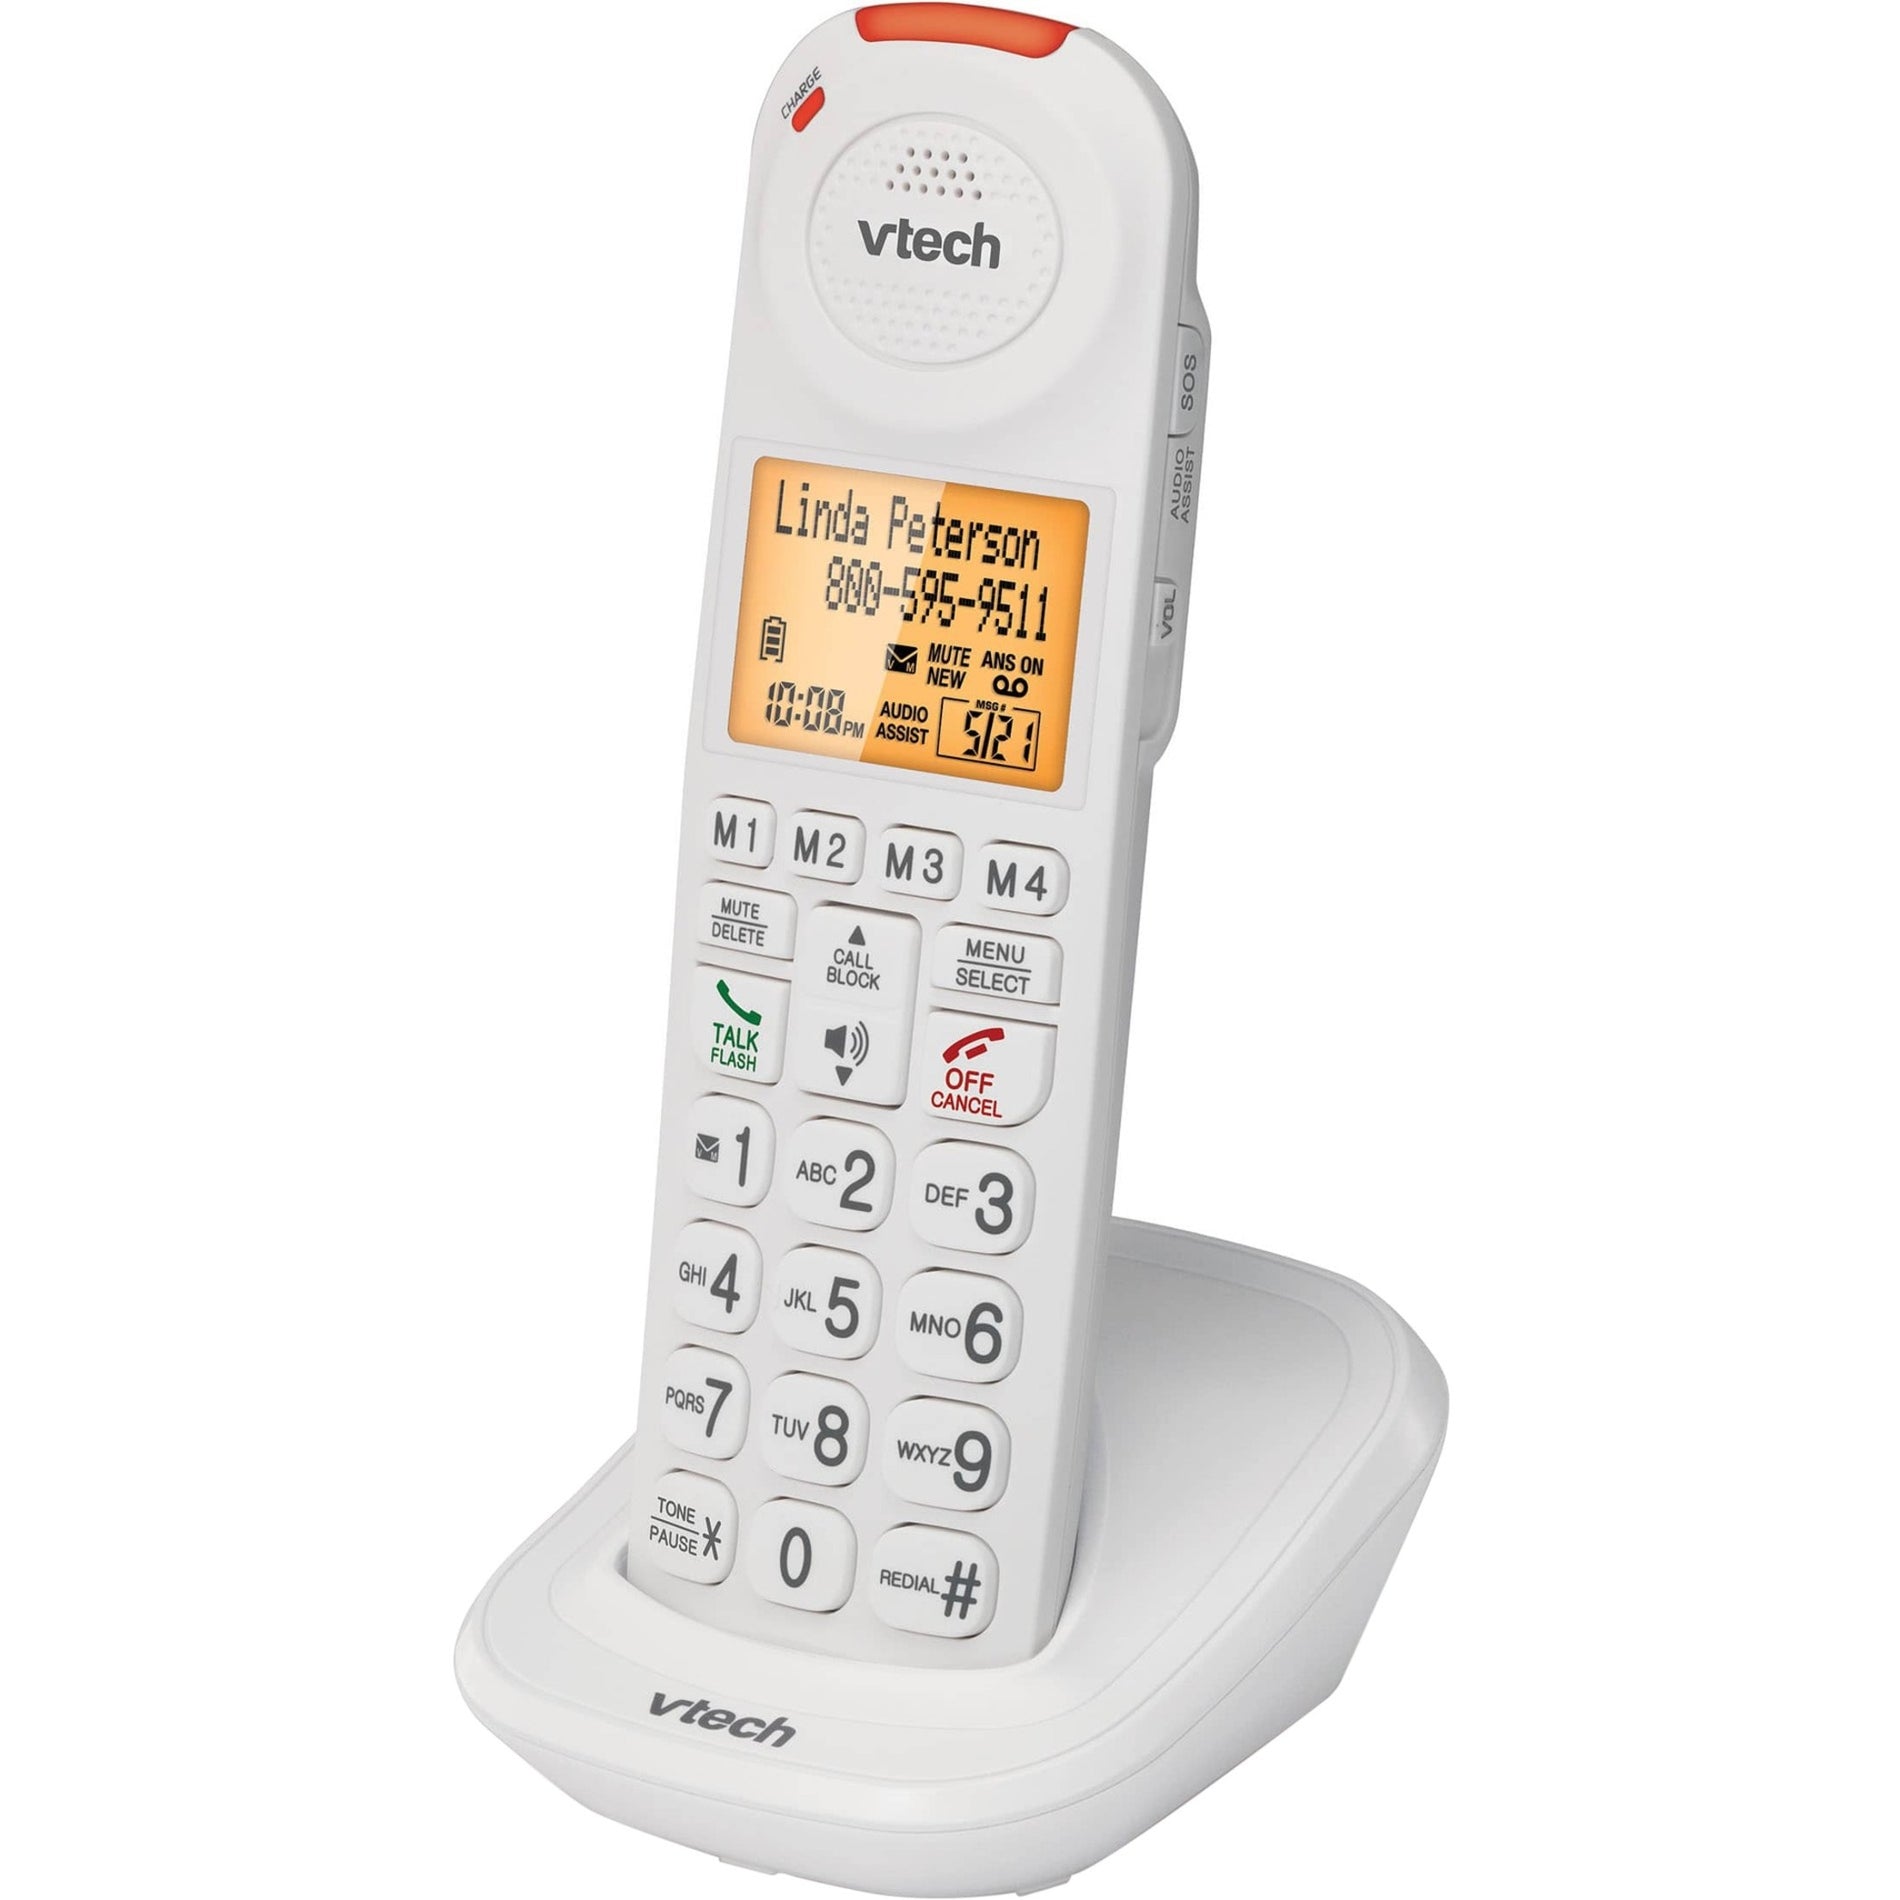 VTech SN5107 Amplified Big Button Accessory Handset for SN5127 or SN5147 Series Phones, Voice Mail, Mute, Volume Control